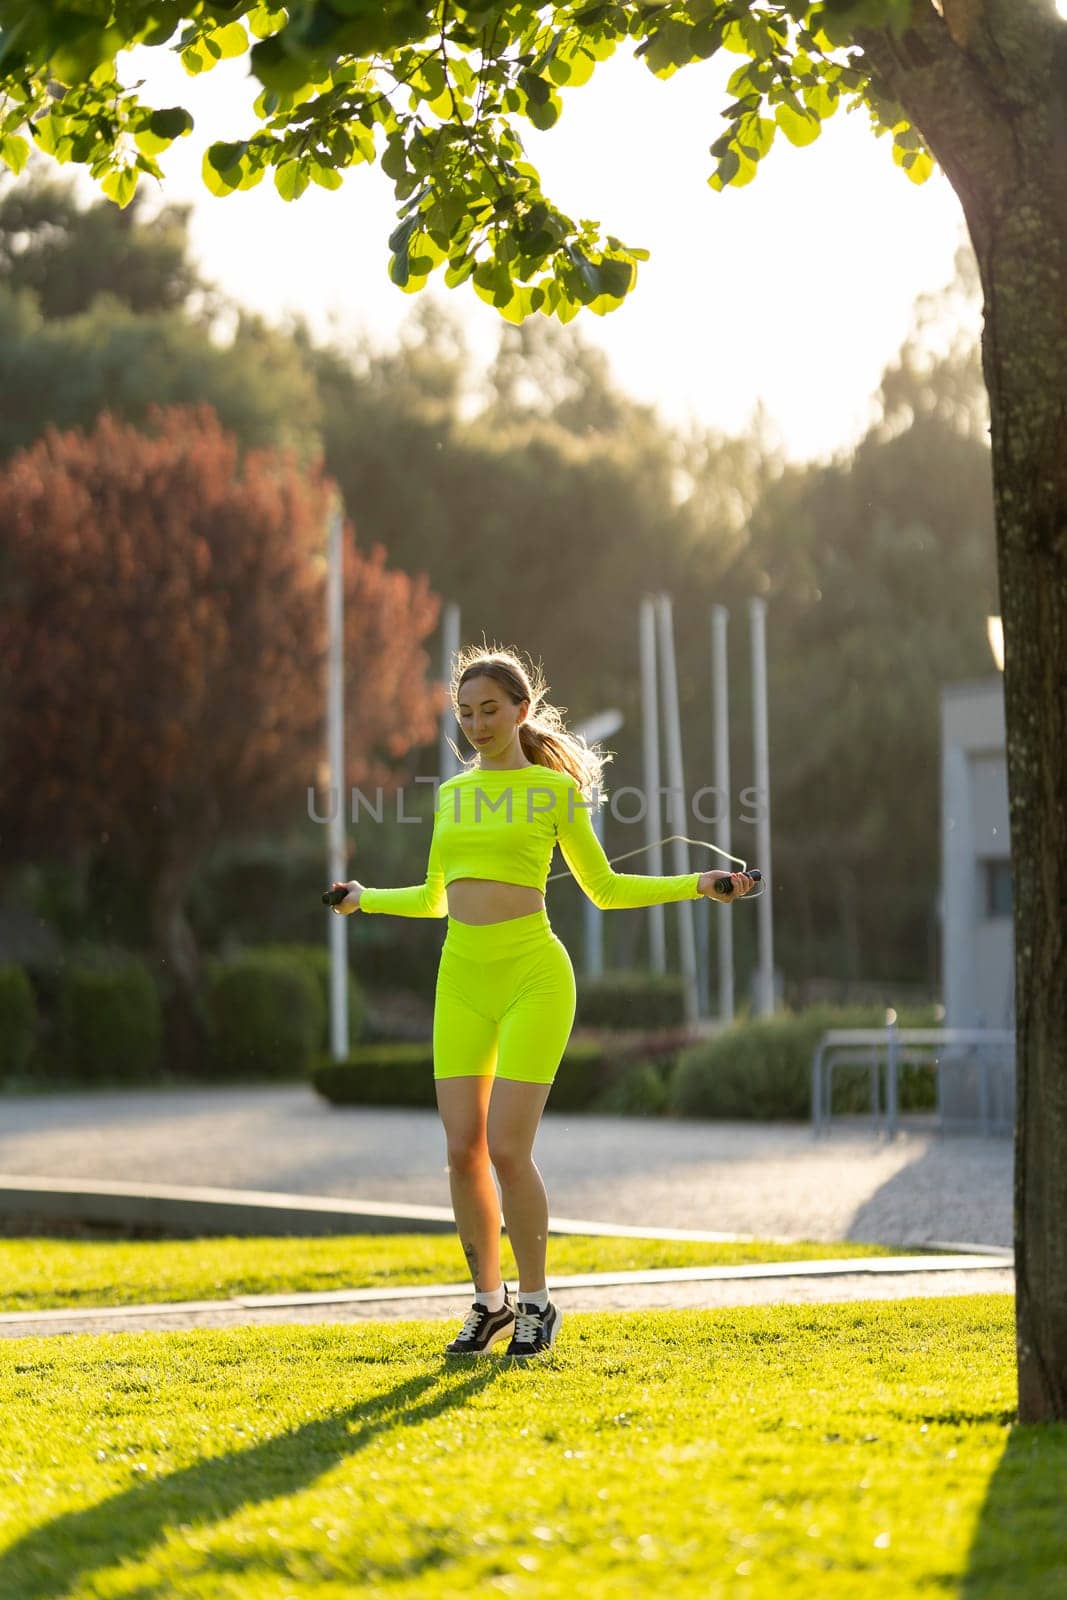 A woman in a neon yellow outfit is jumping rope in a park. The scene is bright and cheerful, with the sun shining down on the woman and the grass